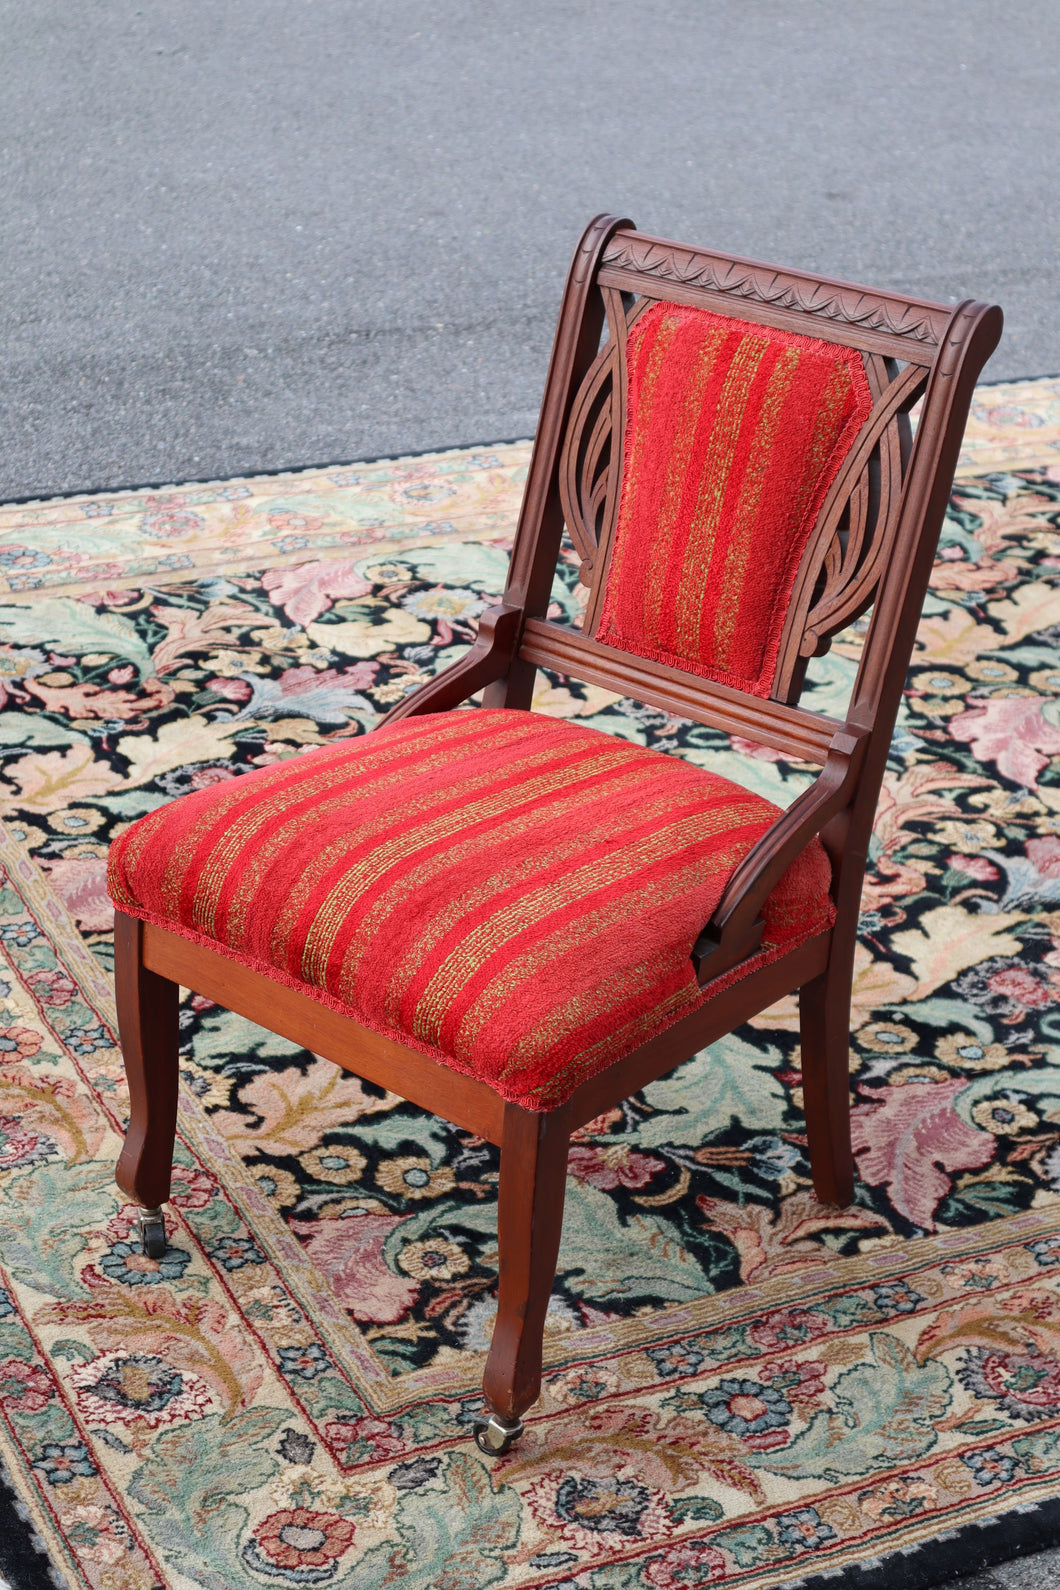 One Great Looking Parlor Chair